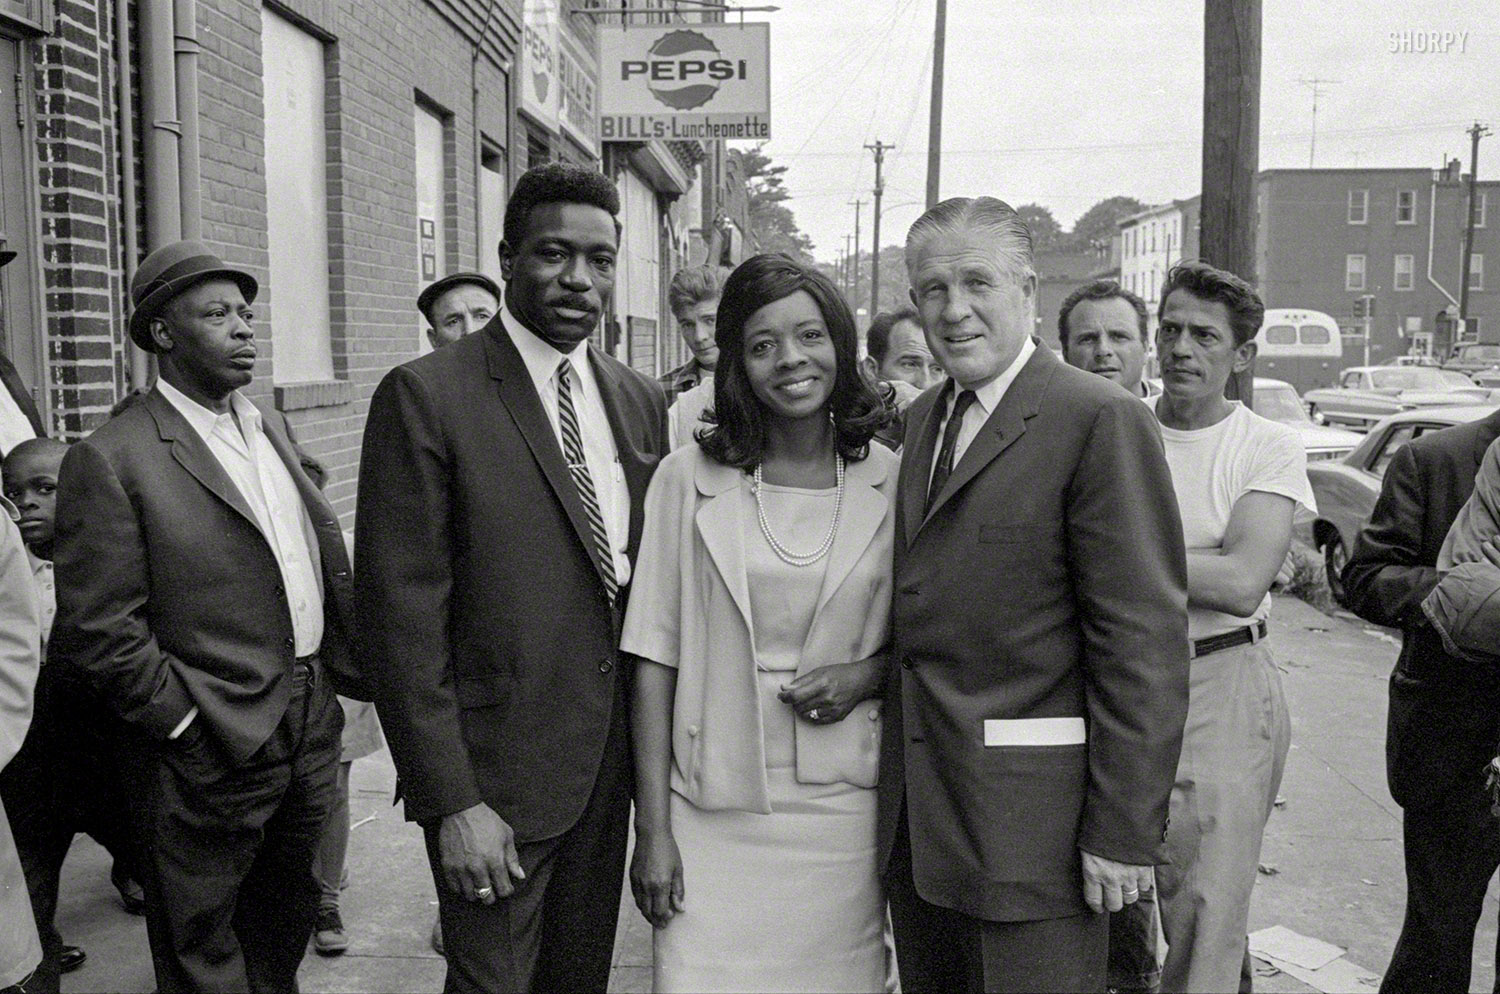 October 1967. "Michigan Gov. George Romney in urban area." The Republican presidential aspirant during the "ghetto tour" that took him to more than a dozen inner cities following that year's race riots and civil unrest. From photos by James Karales for Look magazine. View full size.